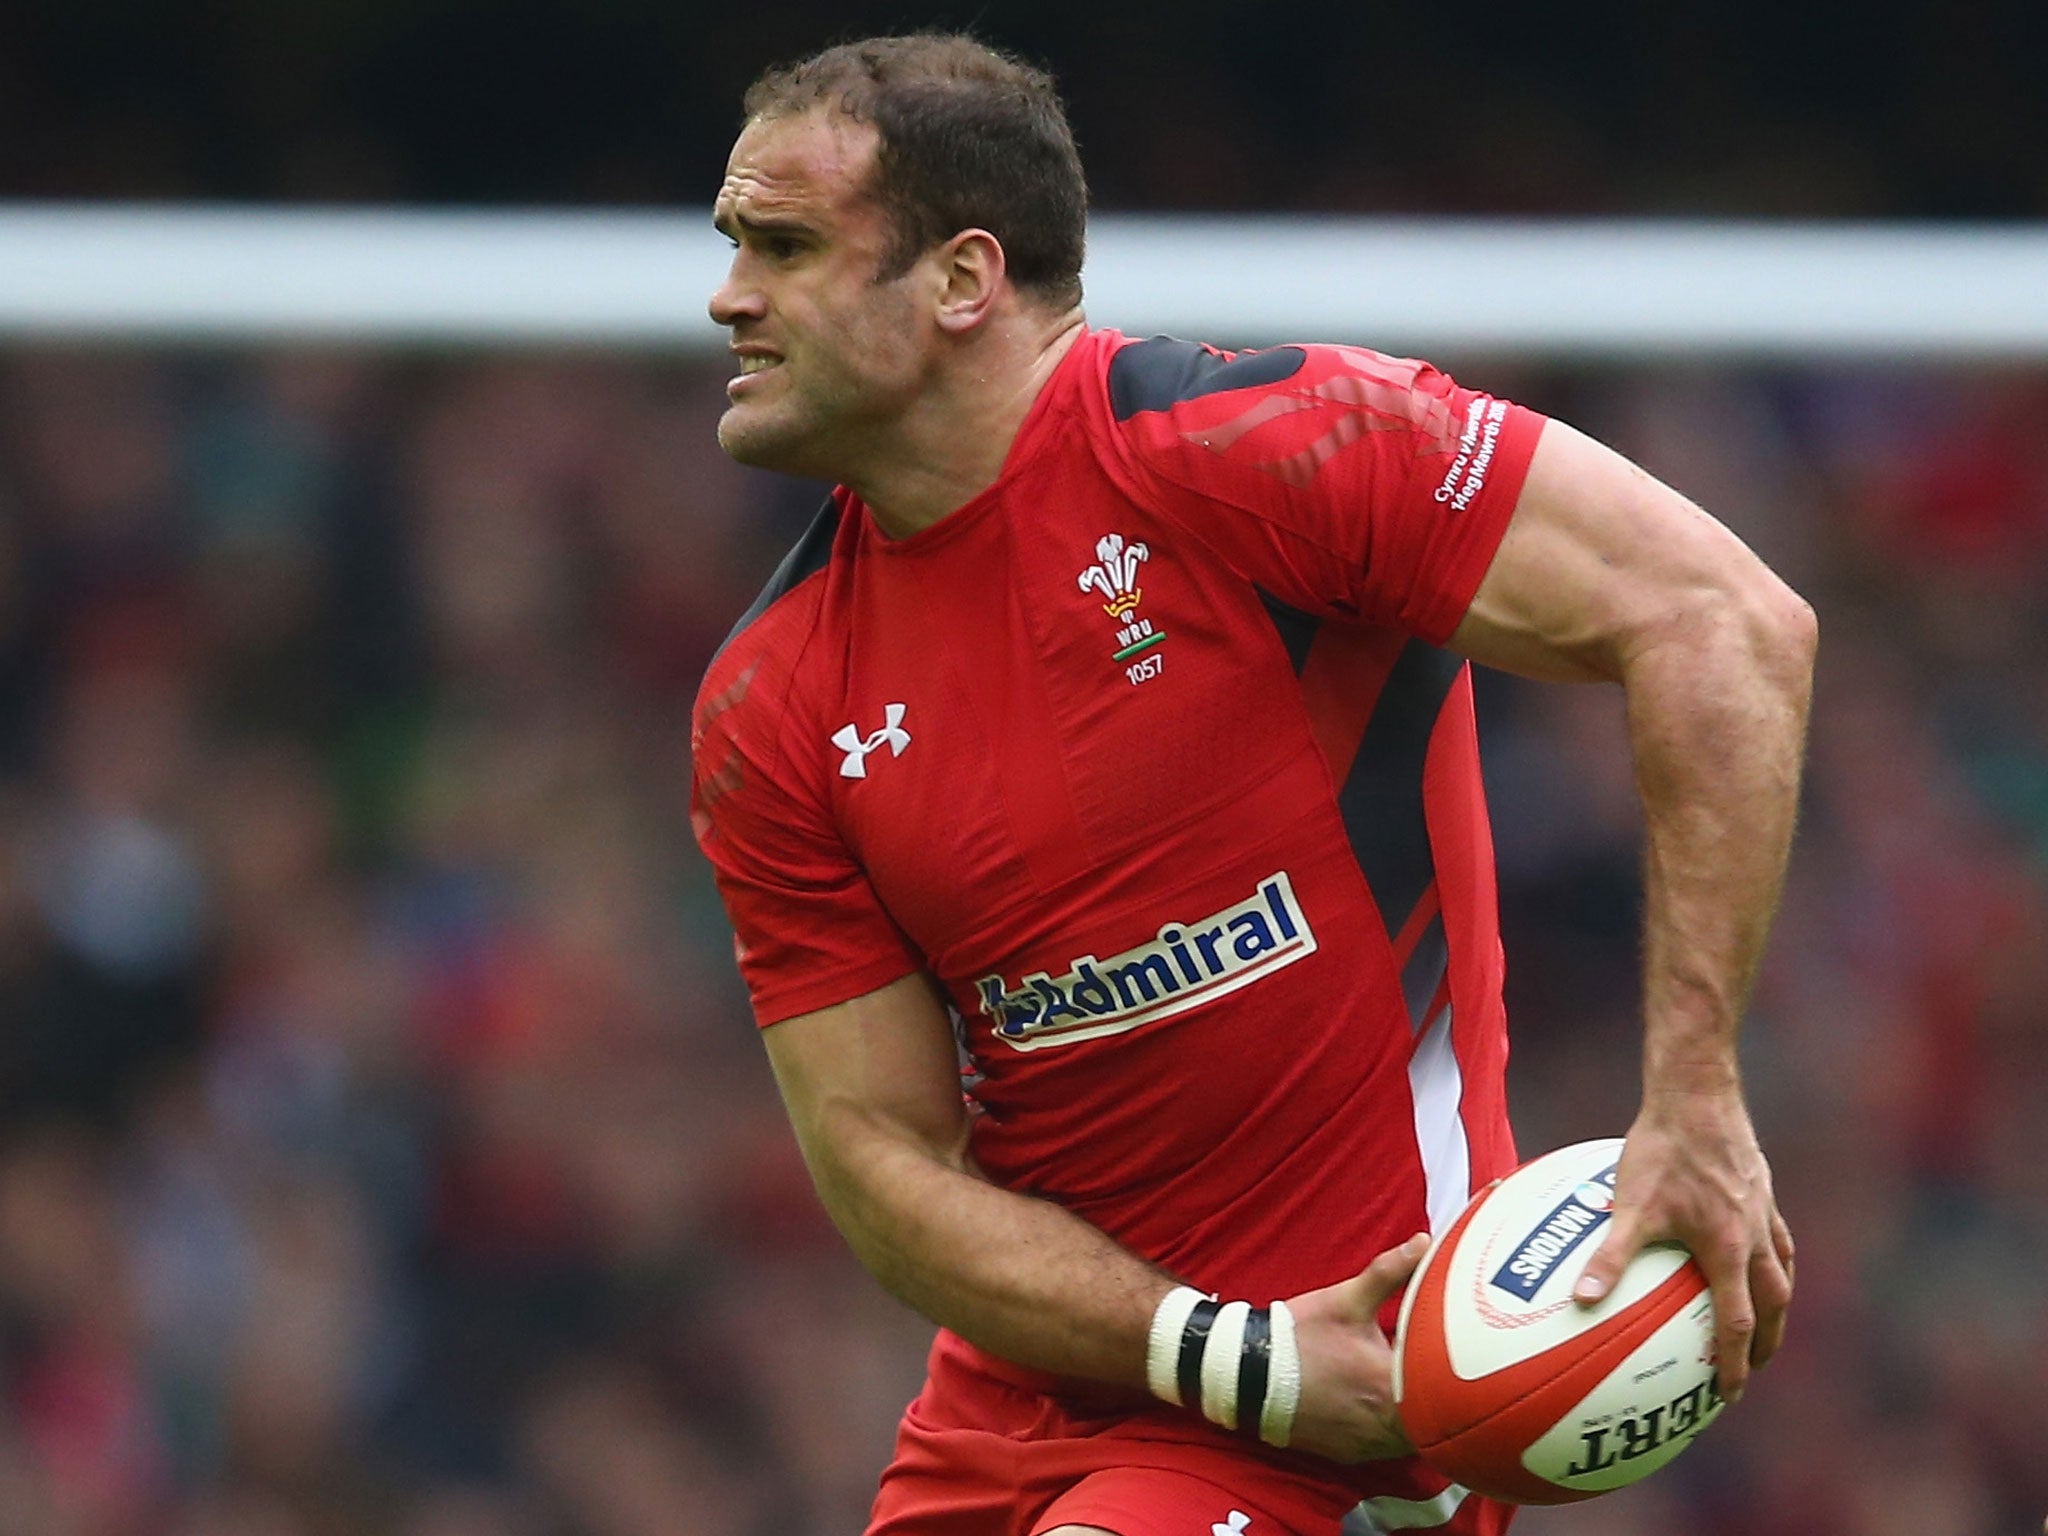 Wales centre Jamie Roberts has agreed to join Harlequins